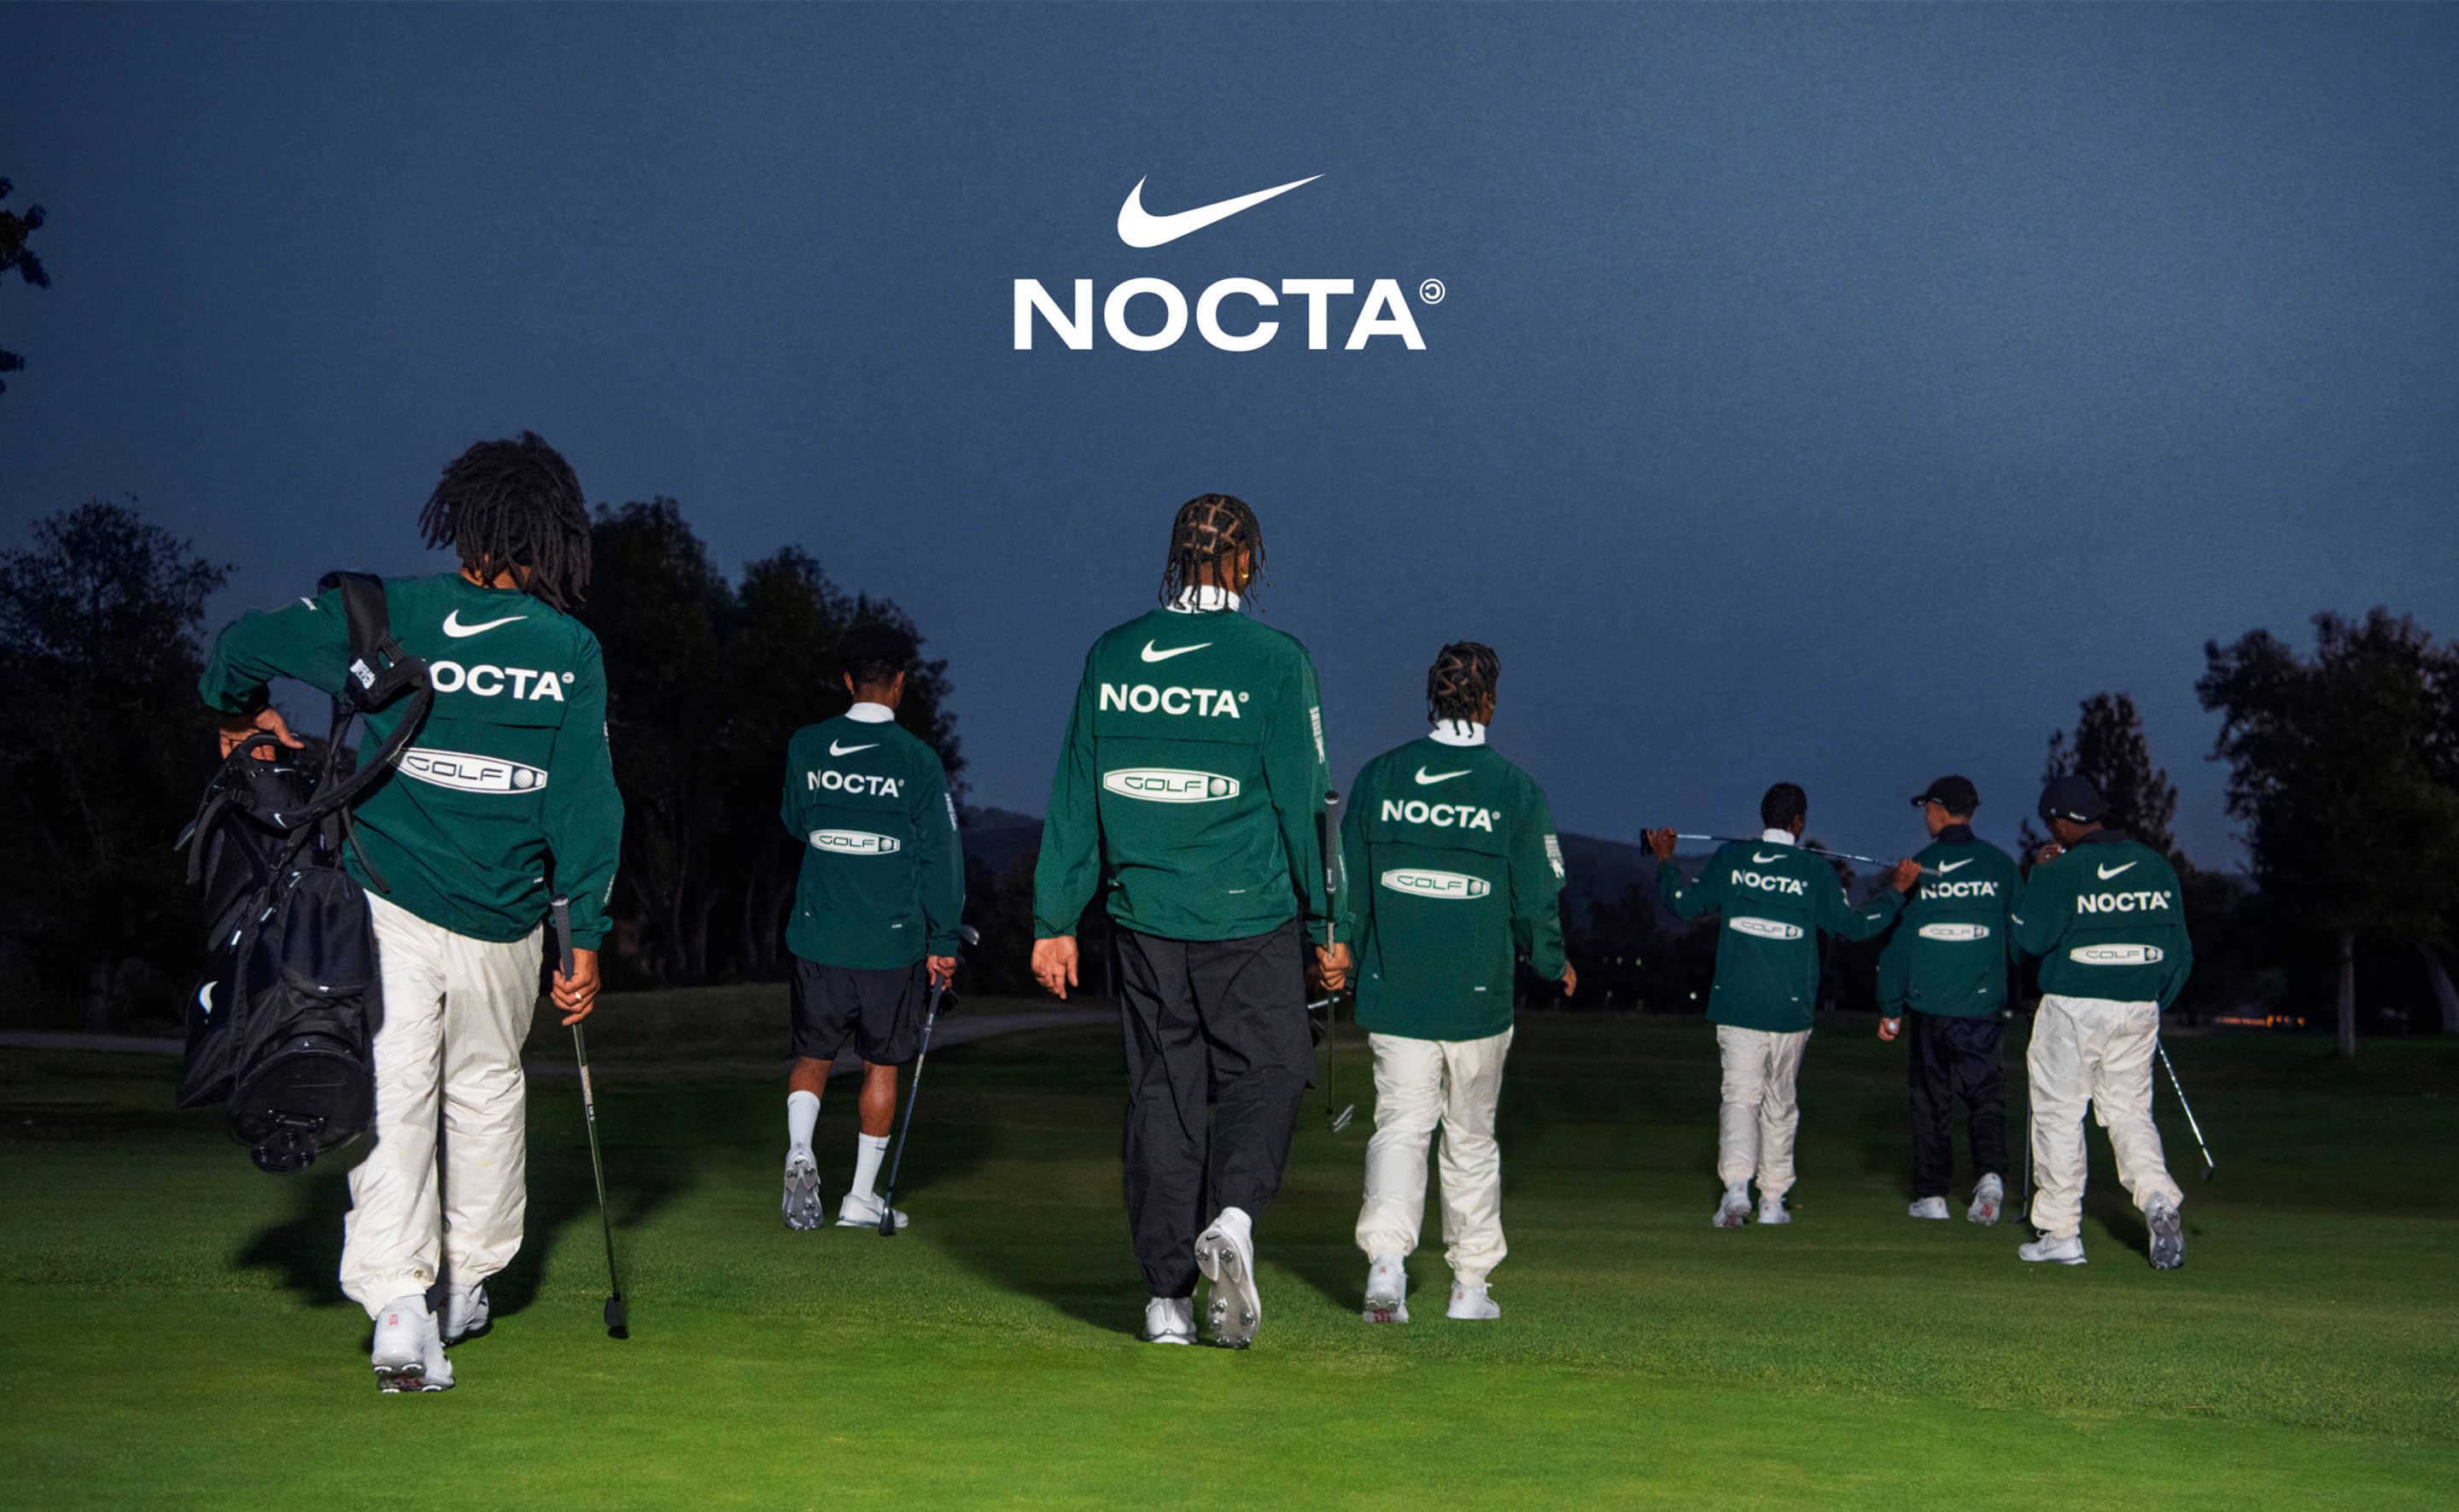 "NIKE NOCTA GOLF COLLECTION"